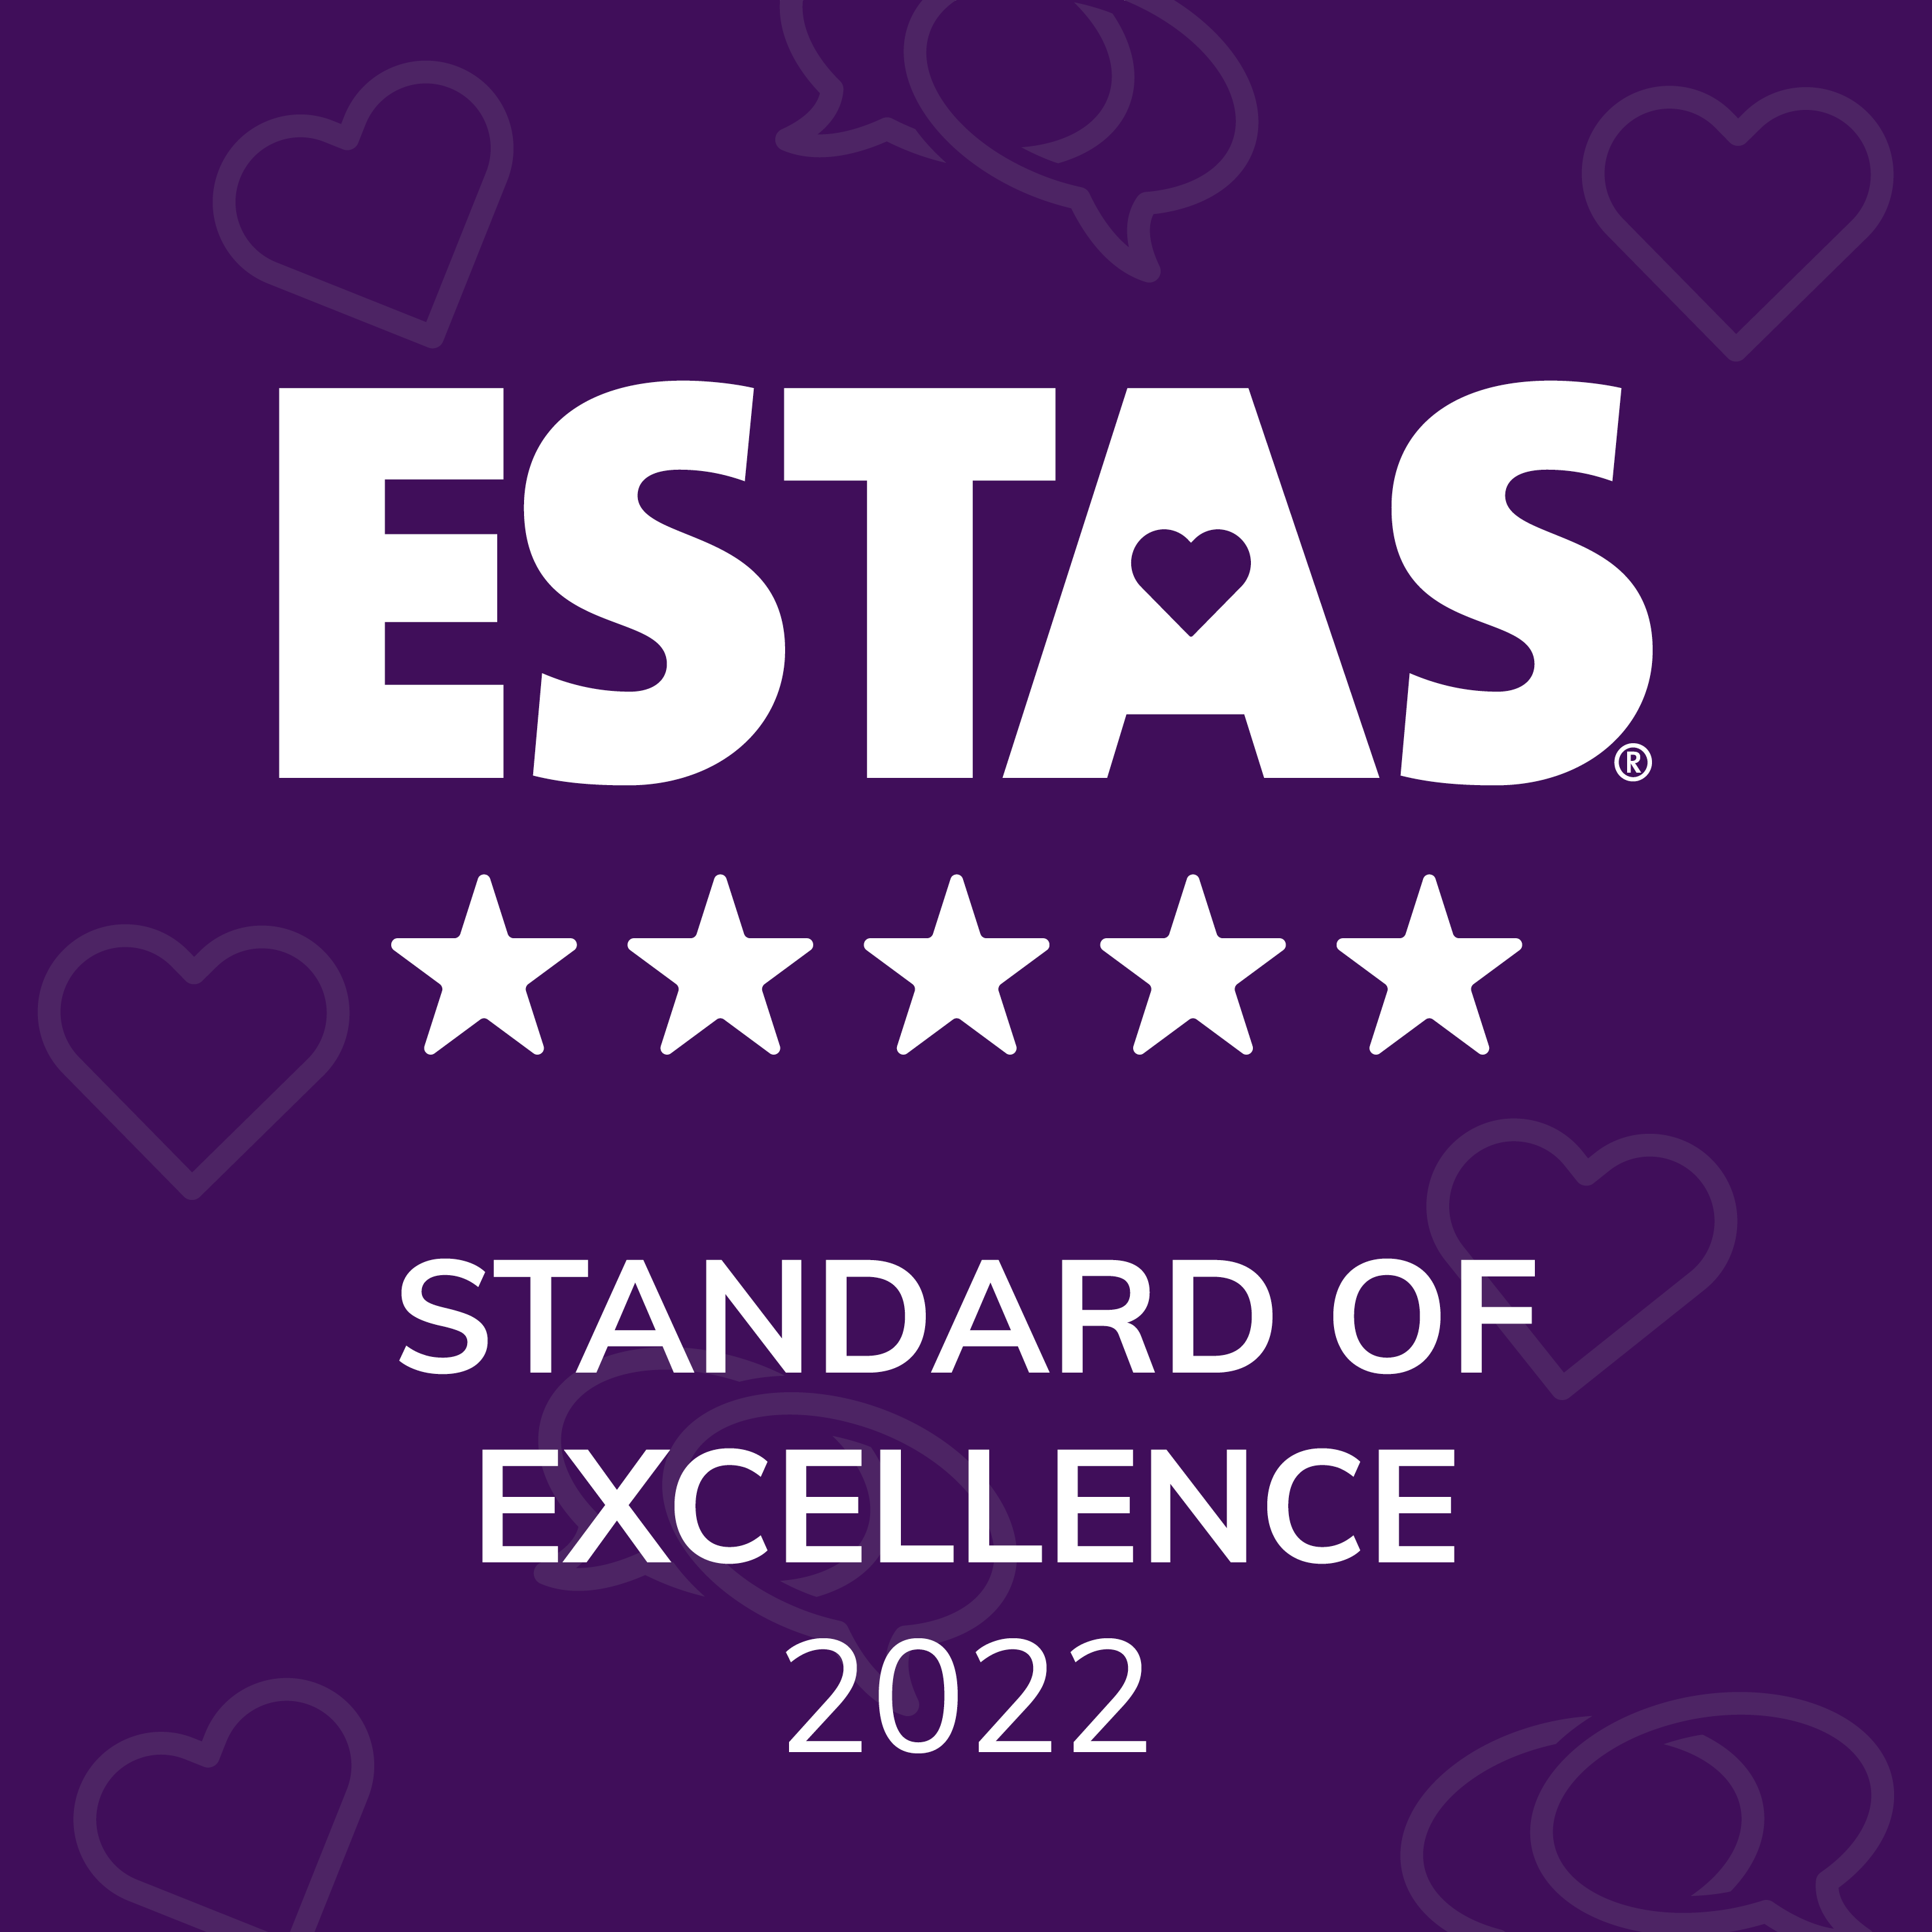 Goodfellows achieves ‘Standard of Excellence’ to make The ESTAS shortlist for 2022.